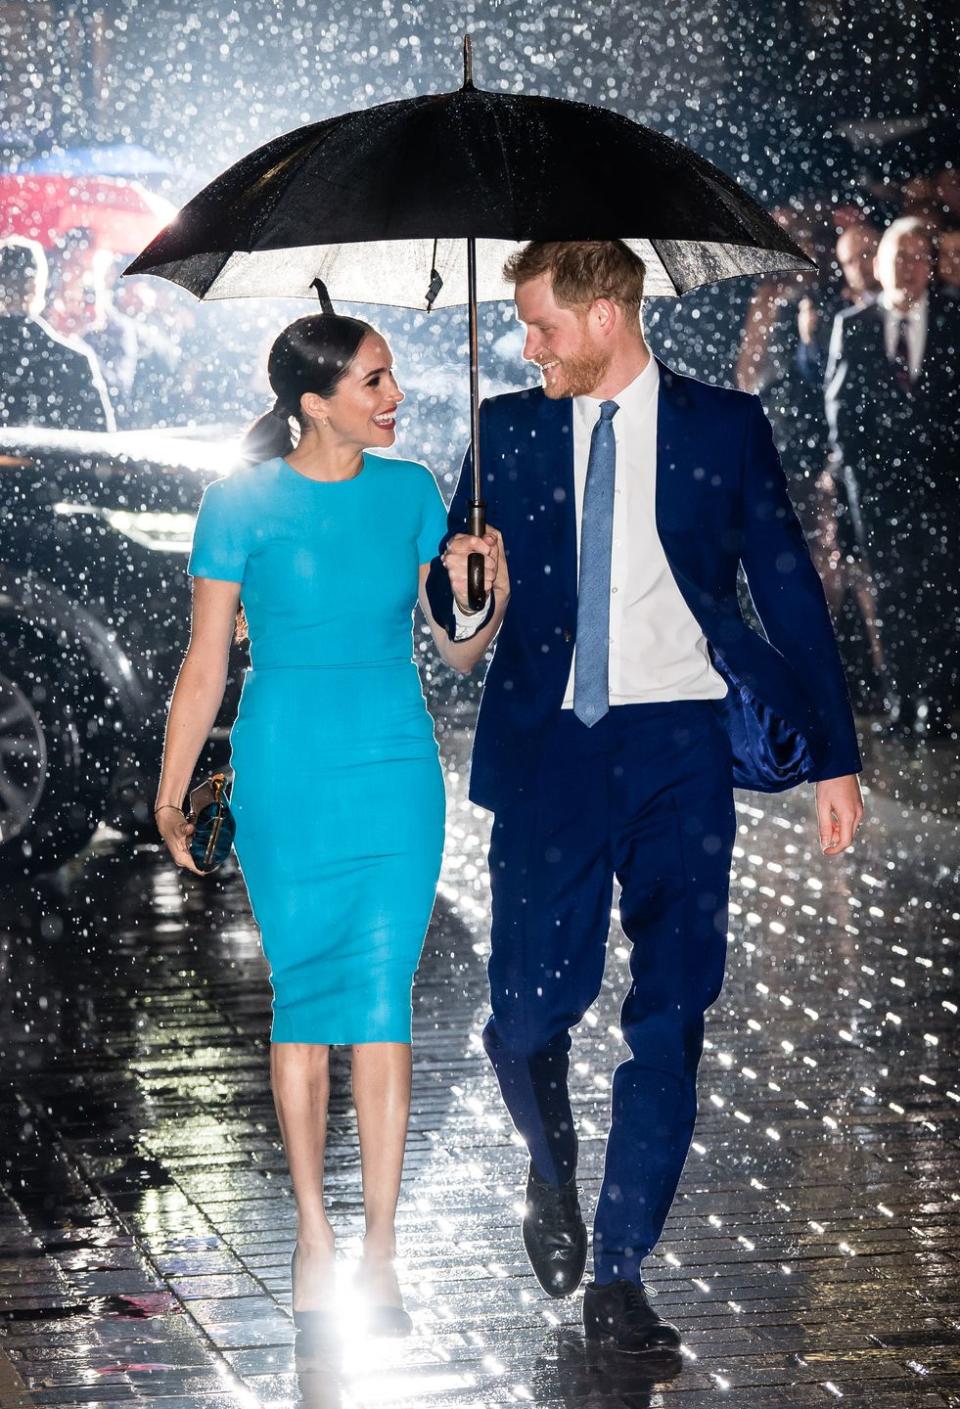 <p>The couple were photographed smiling at each other in the rain as Prince Harry held an umbrella over his wife's head. Could this be any sweeter? </p>